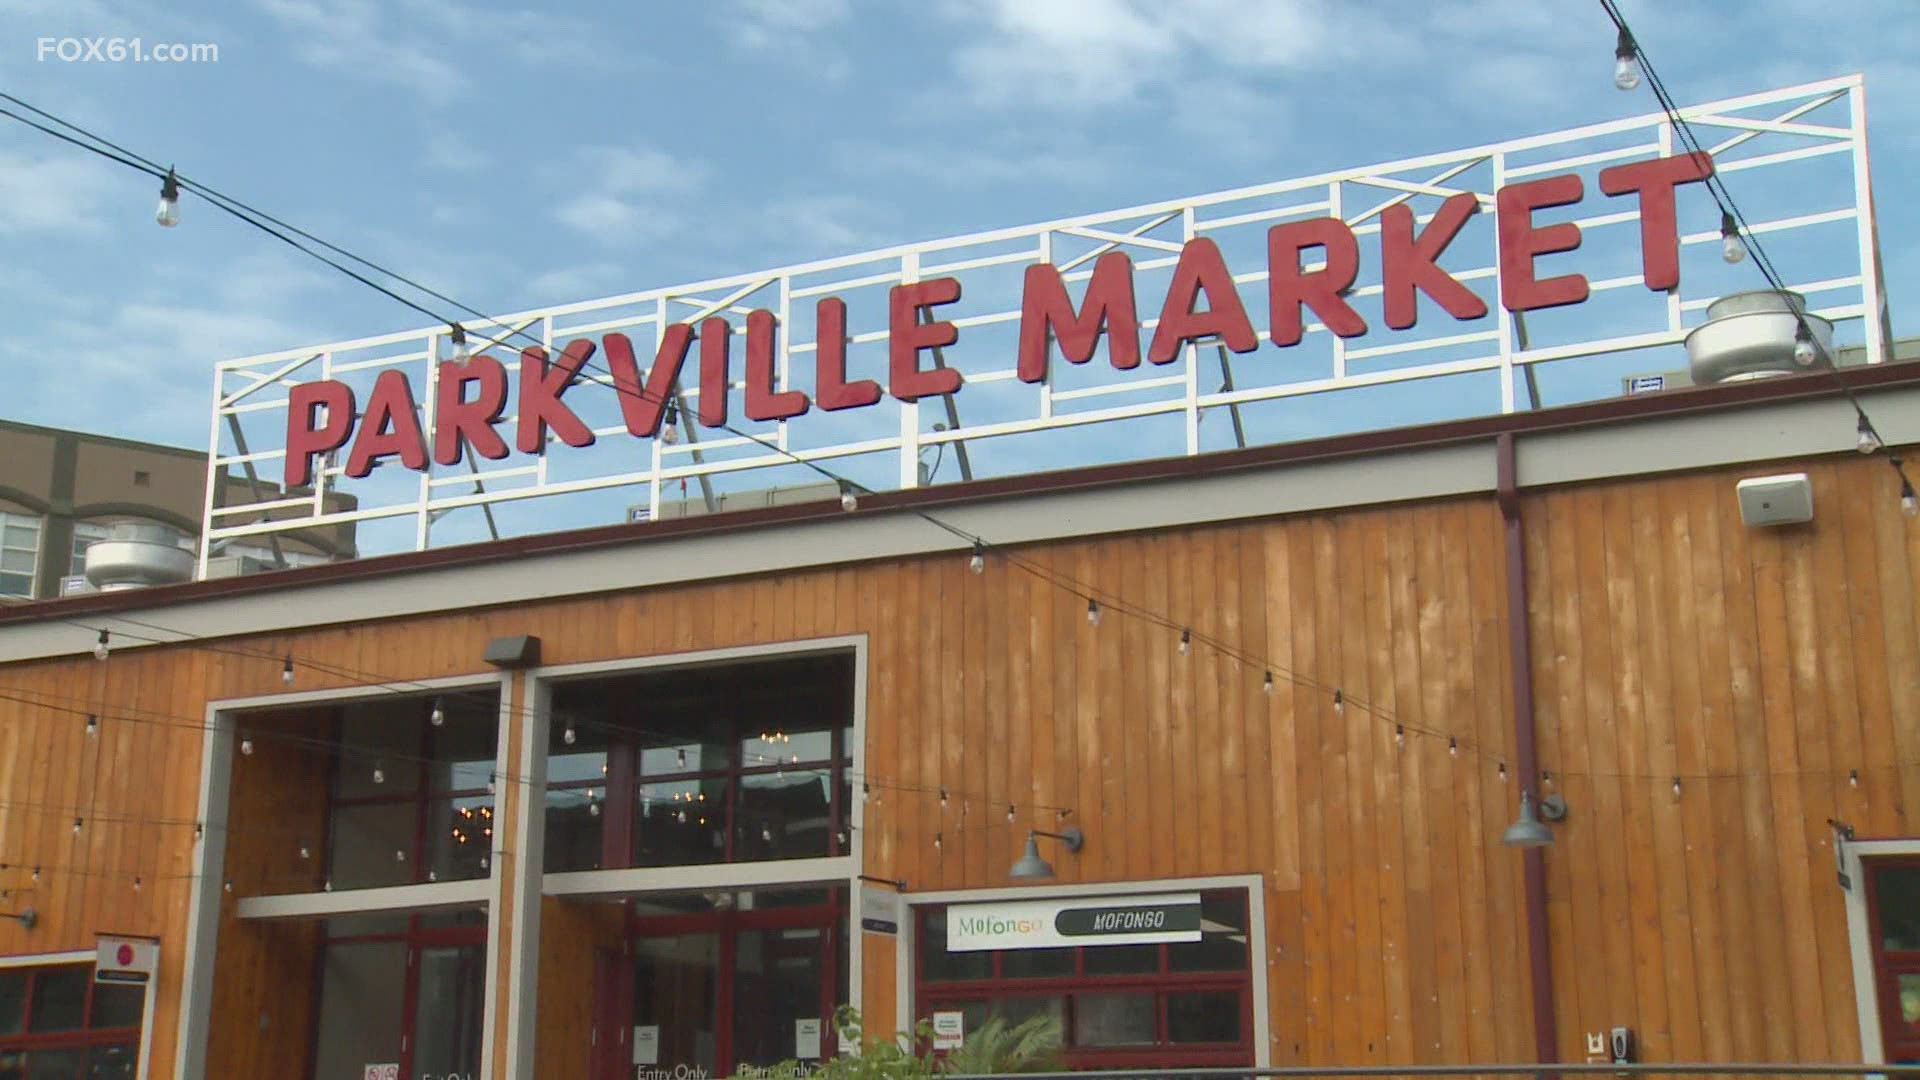 FOX61's Sean Pragano went to Parkville Market in Hartford Friday for the delicious variety of foods.